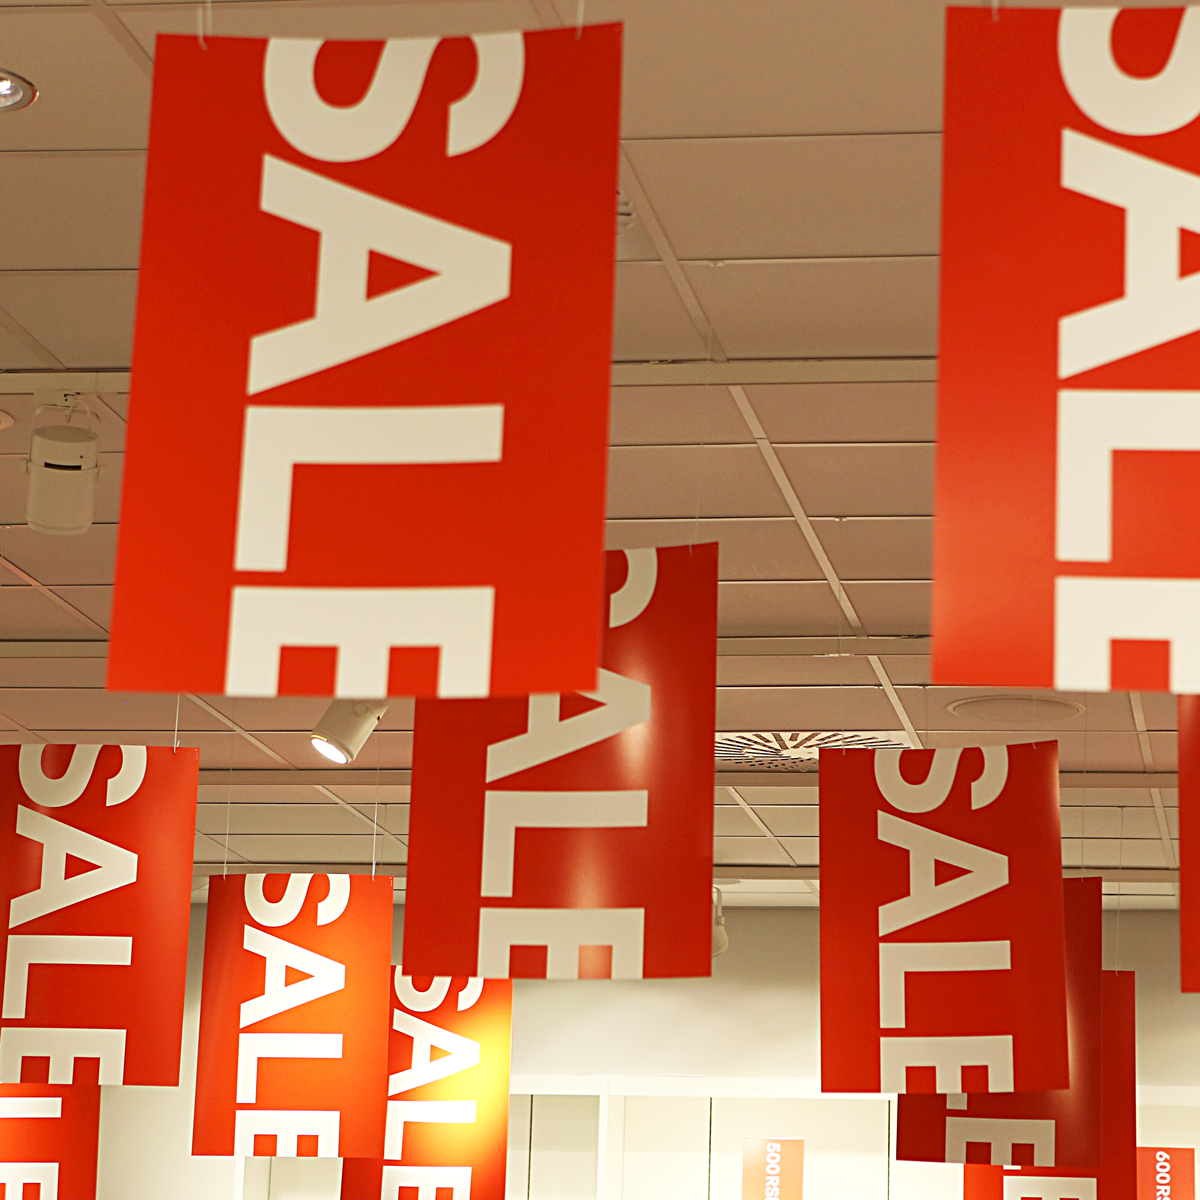 hanging-retail-sale-signs-boards-n-smith-printed-signage-direct-substrate